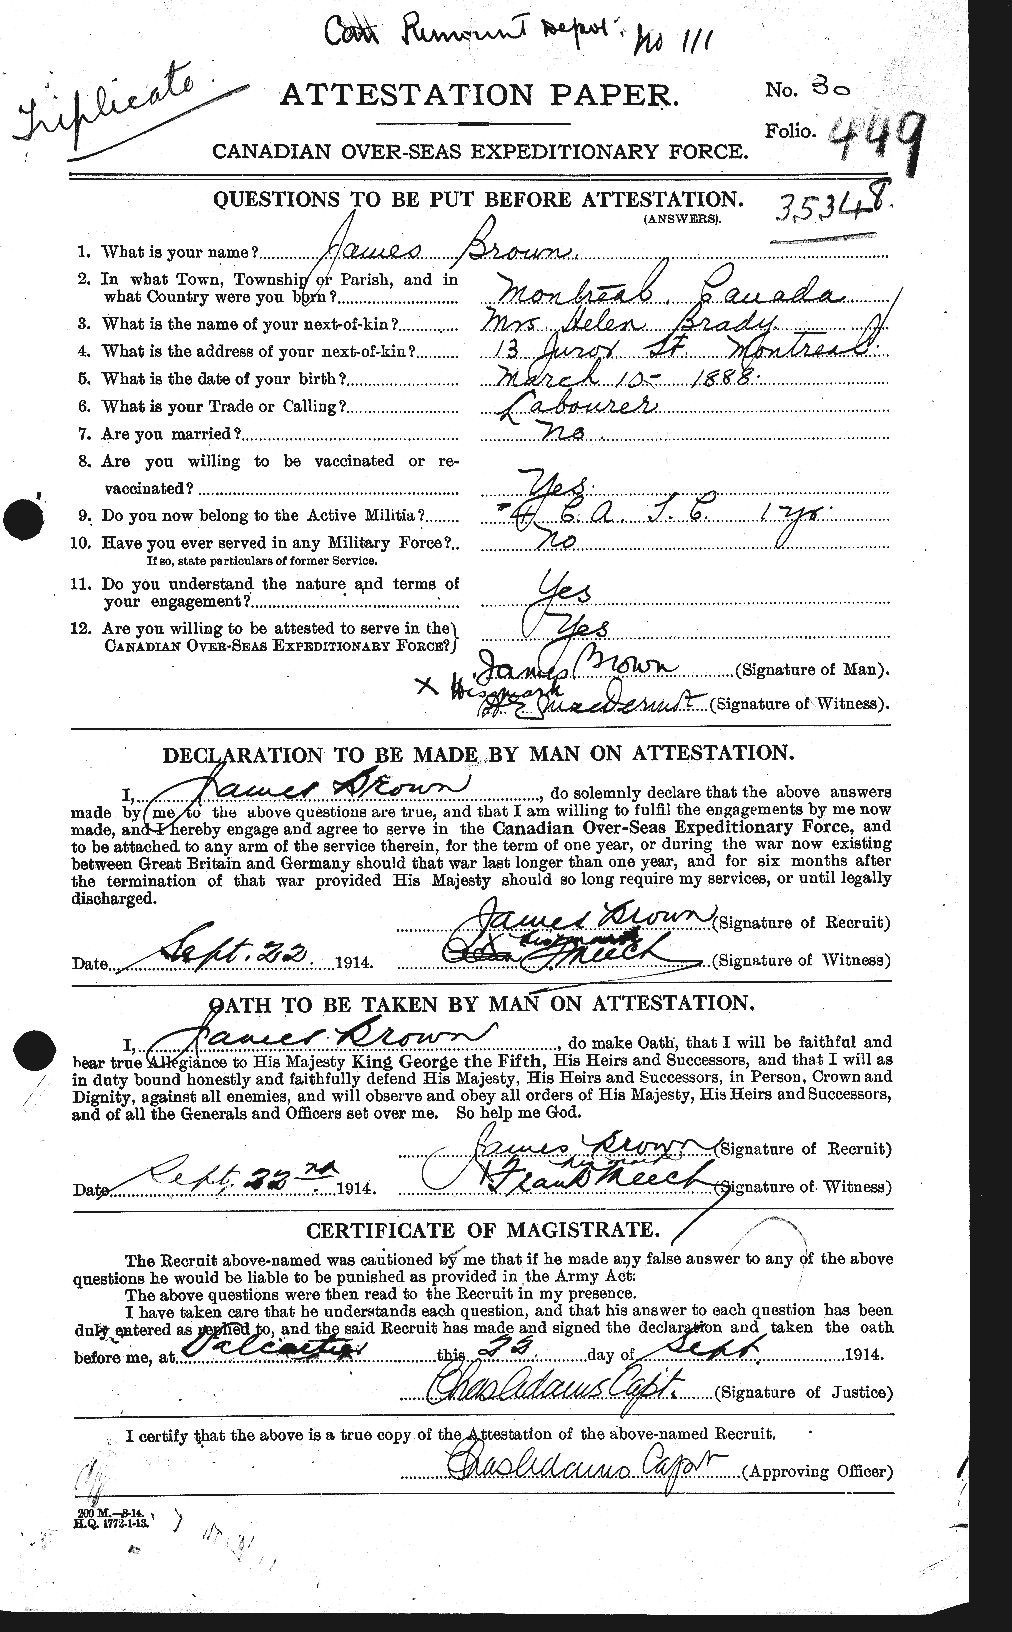 Personnel Records of the First World War - CEF 265763a